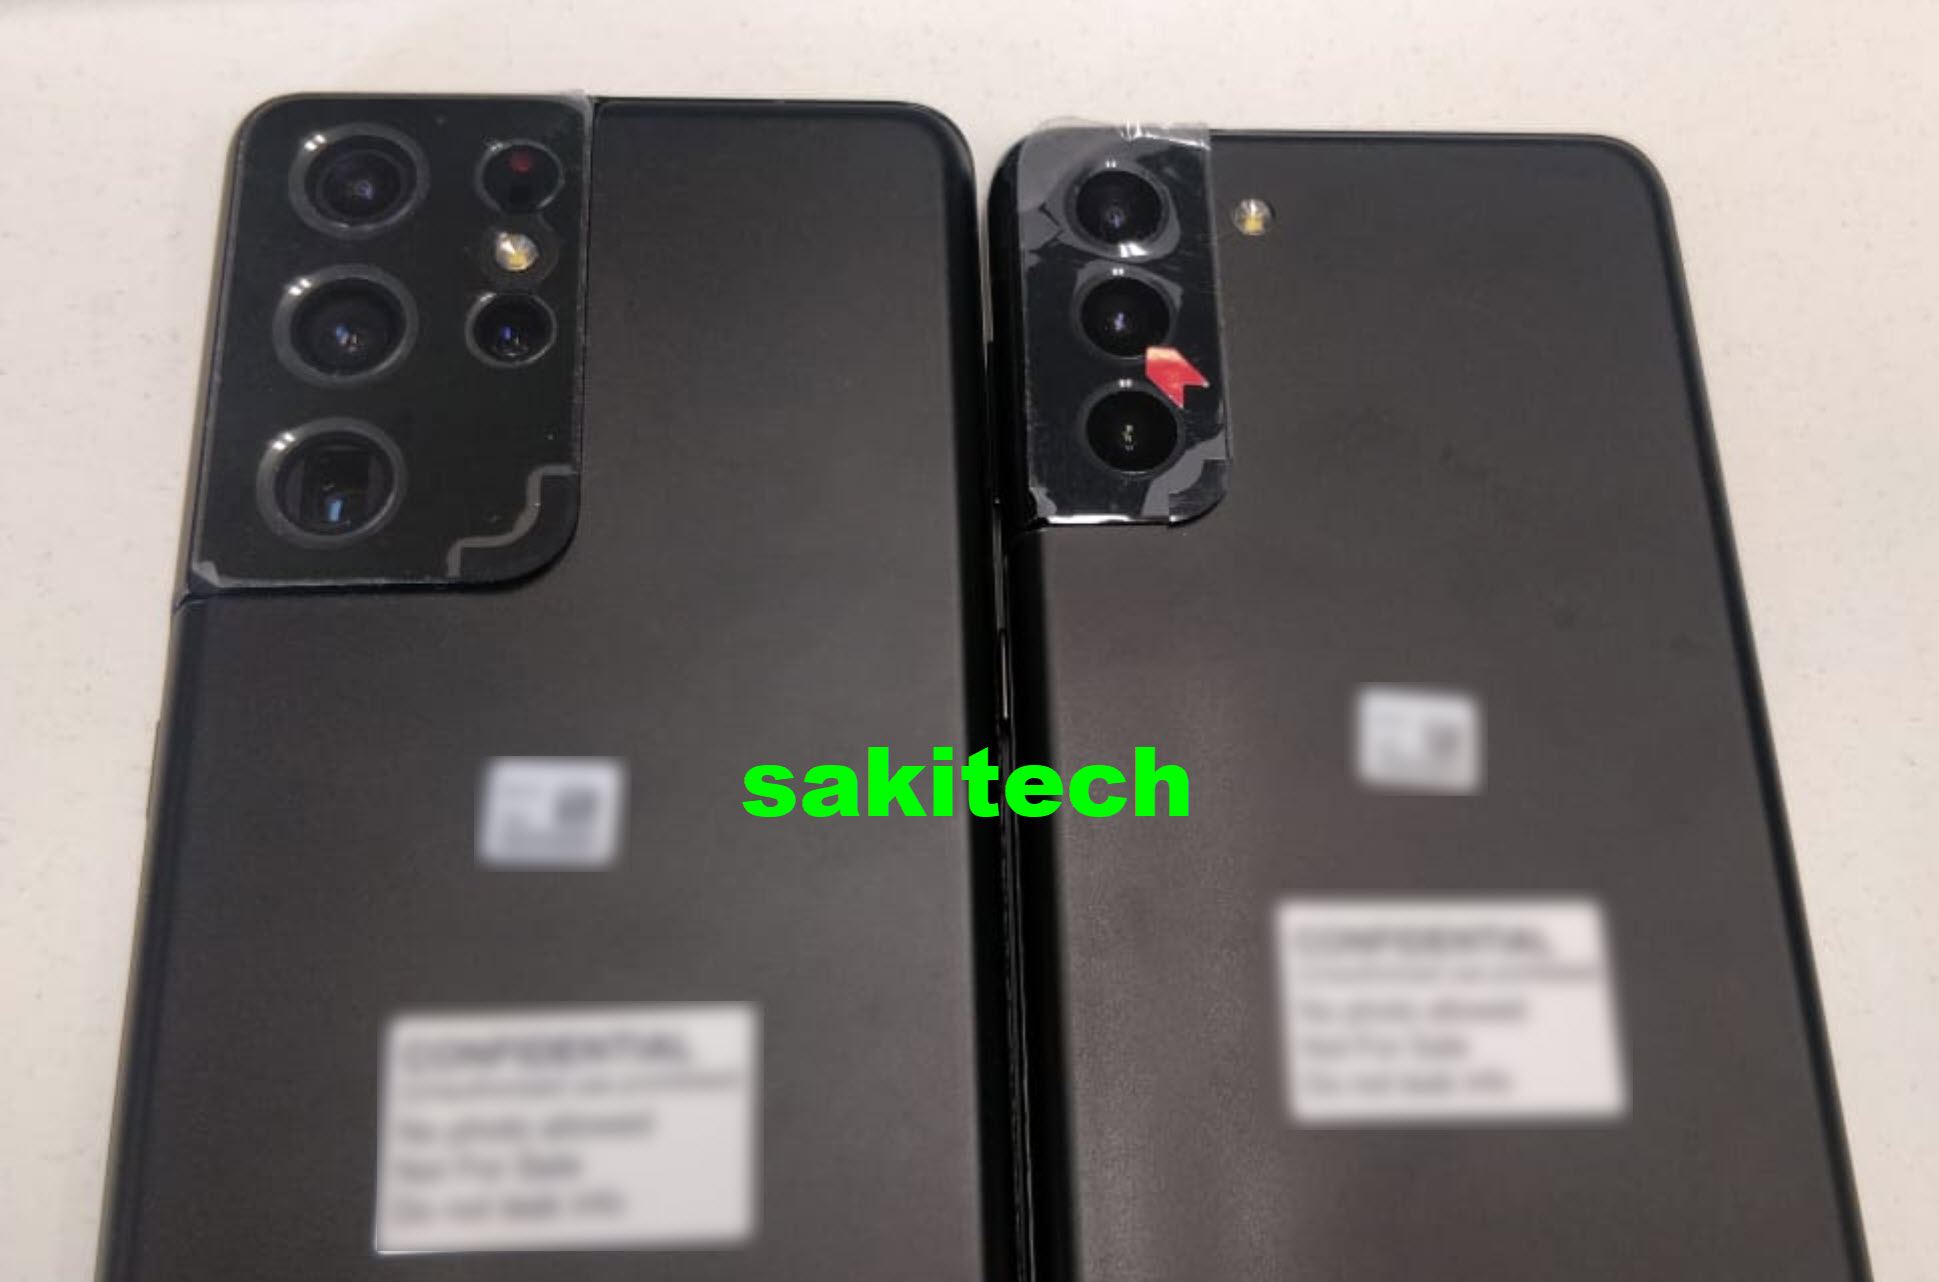 Breaking: Galaxy S21+ and S21 Ultra cameras get exposed in